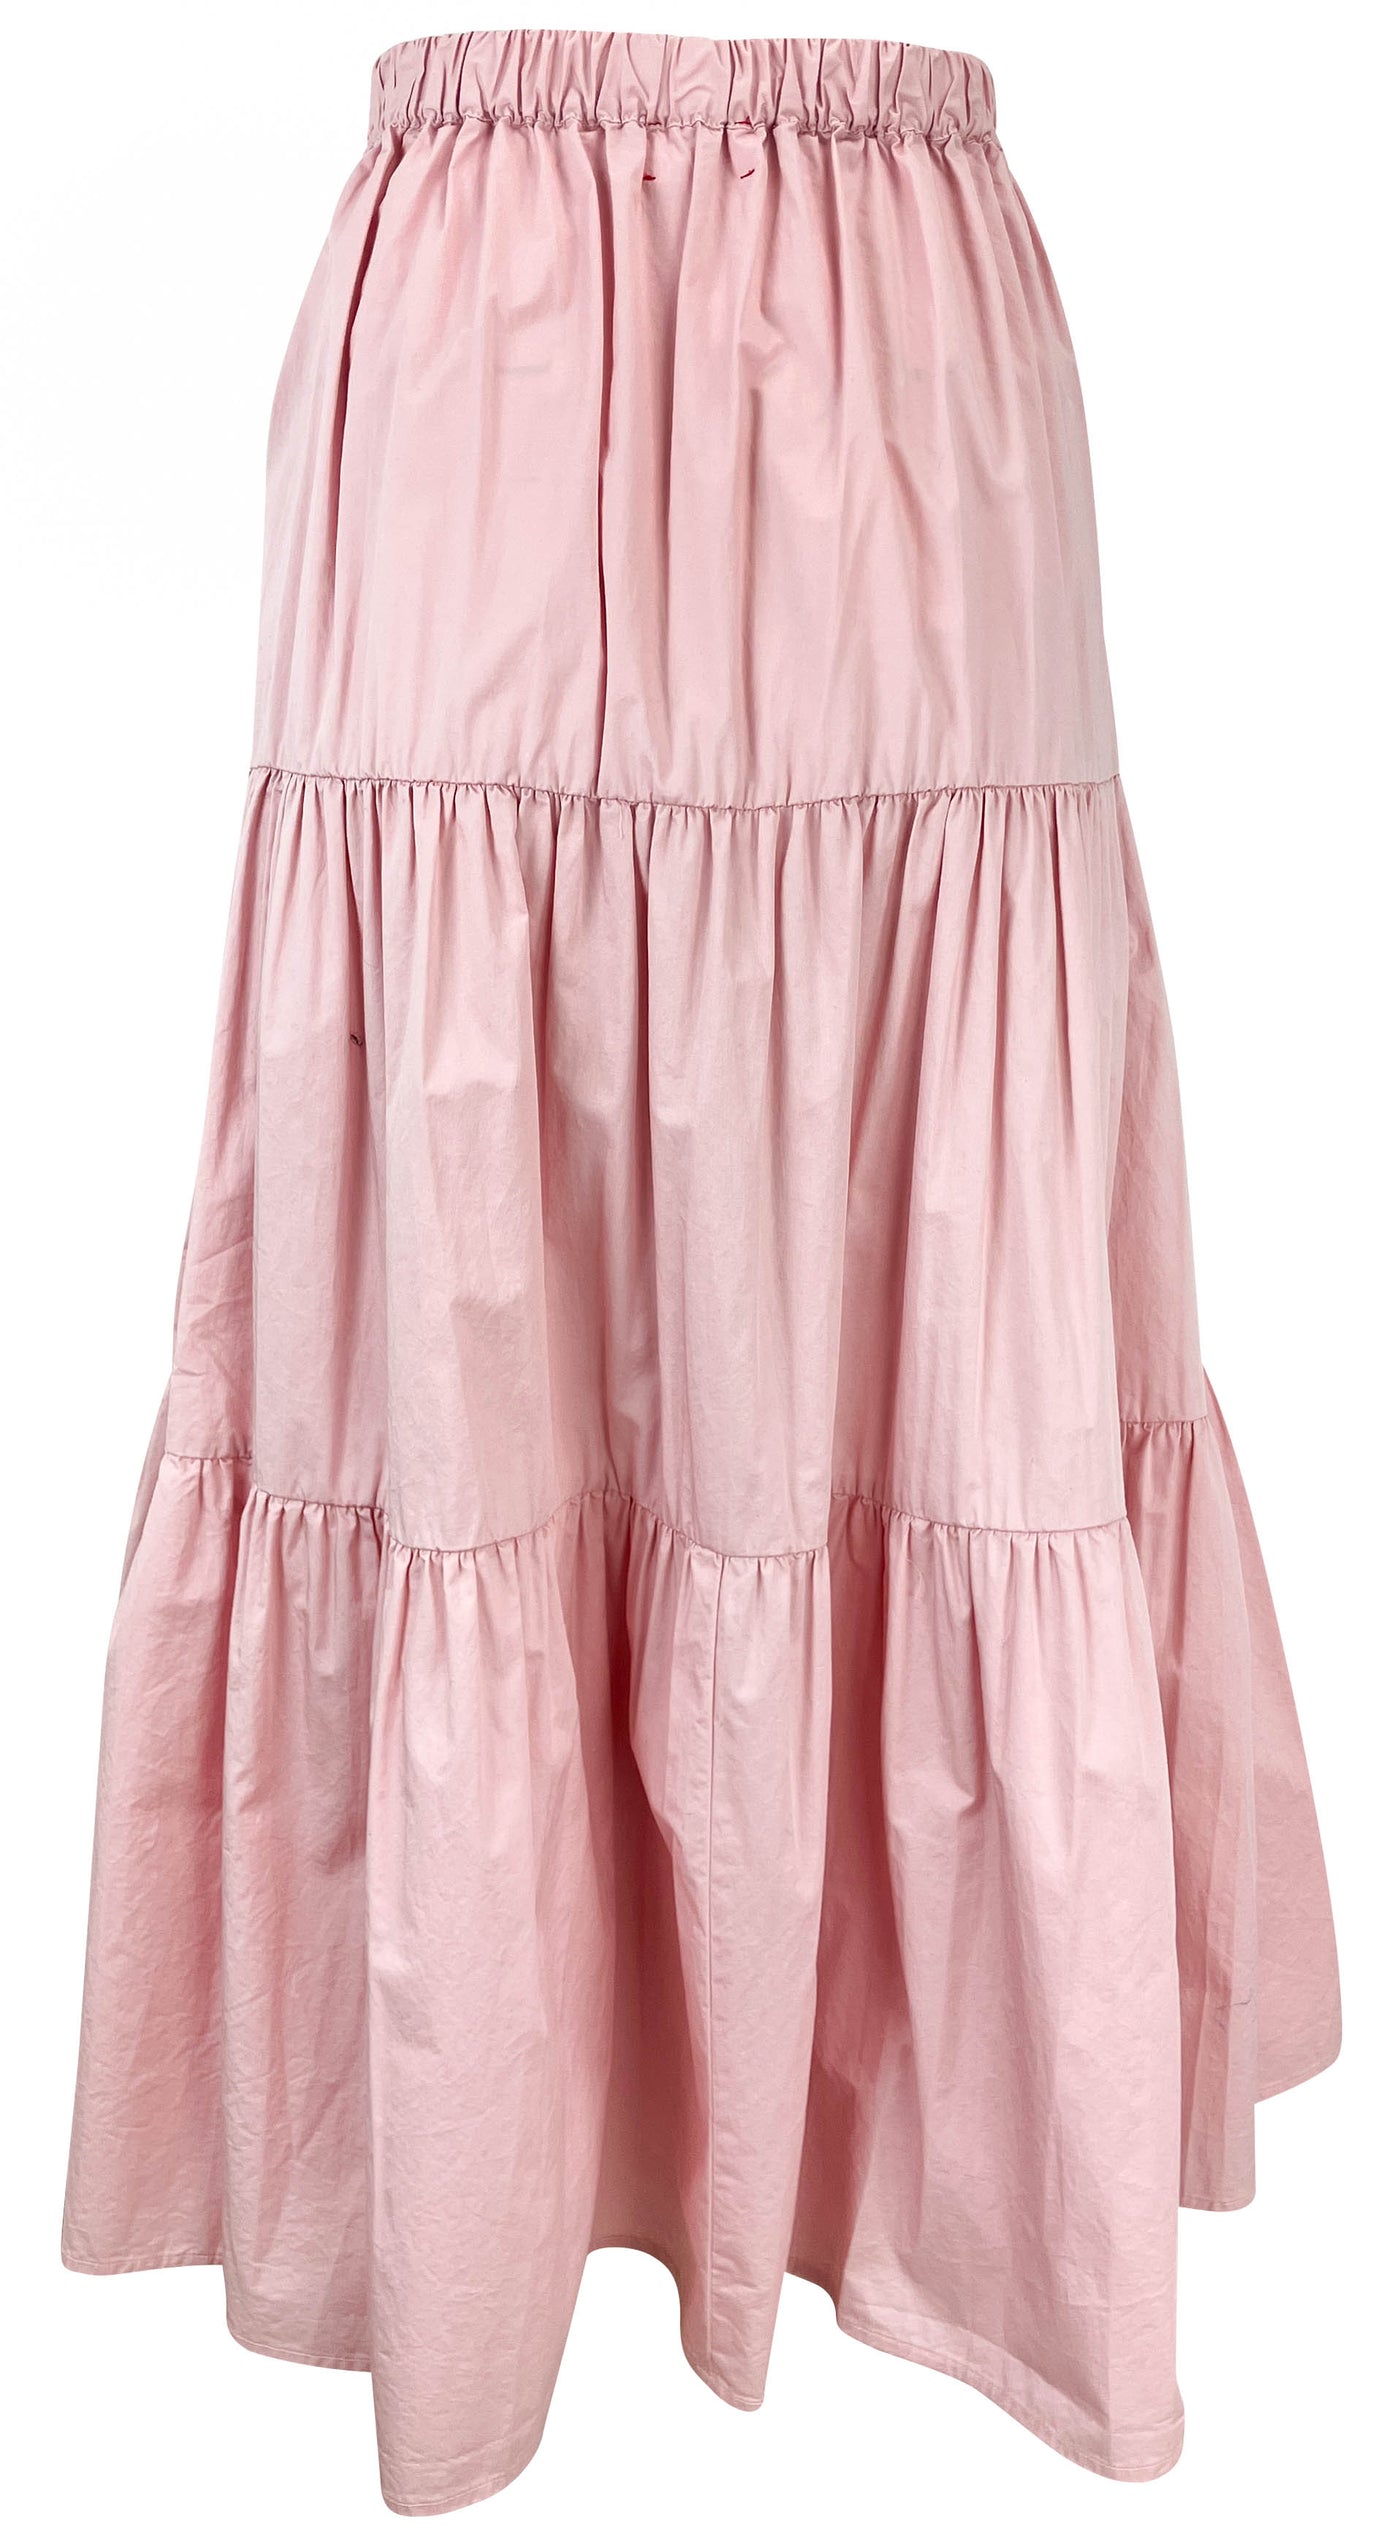 Xírena Tiered Ankle Length Skirt in Pale Pink - Discounts on Xírena at UAL